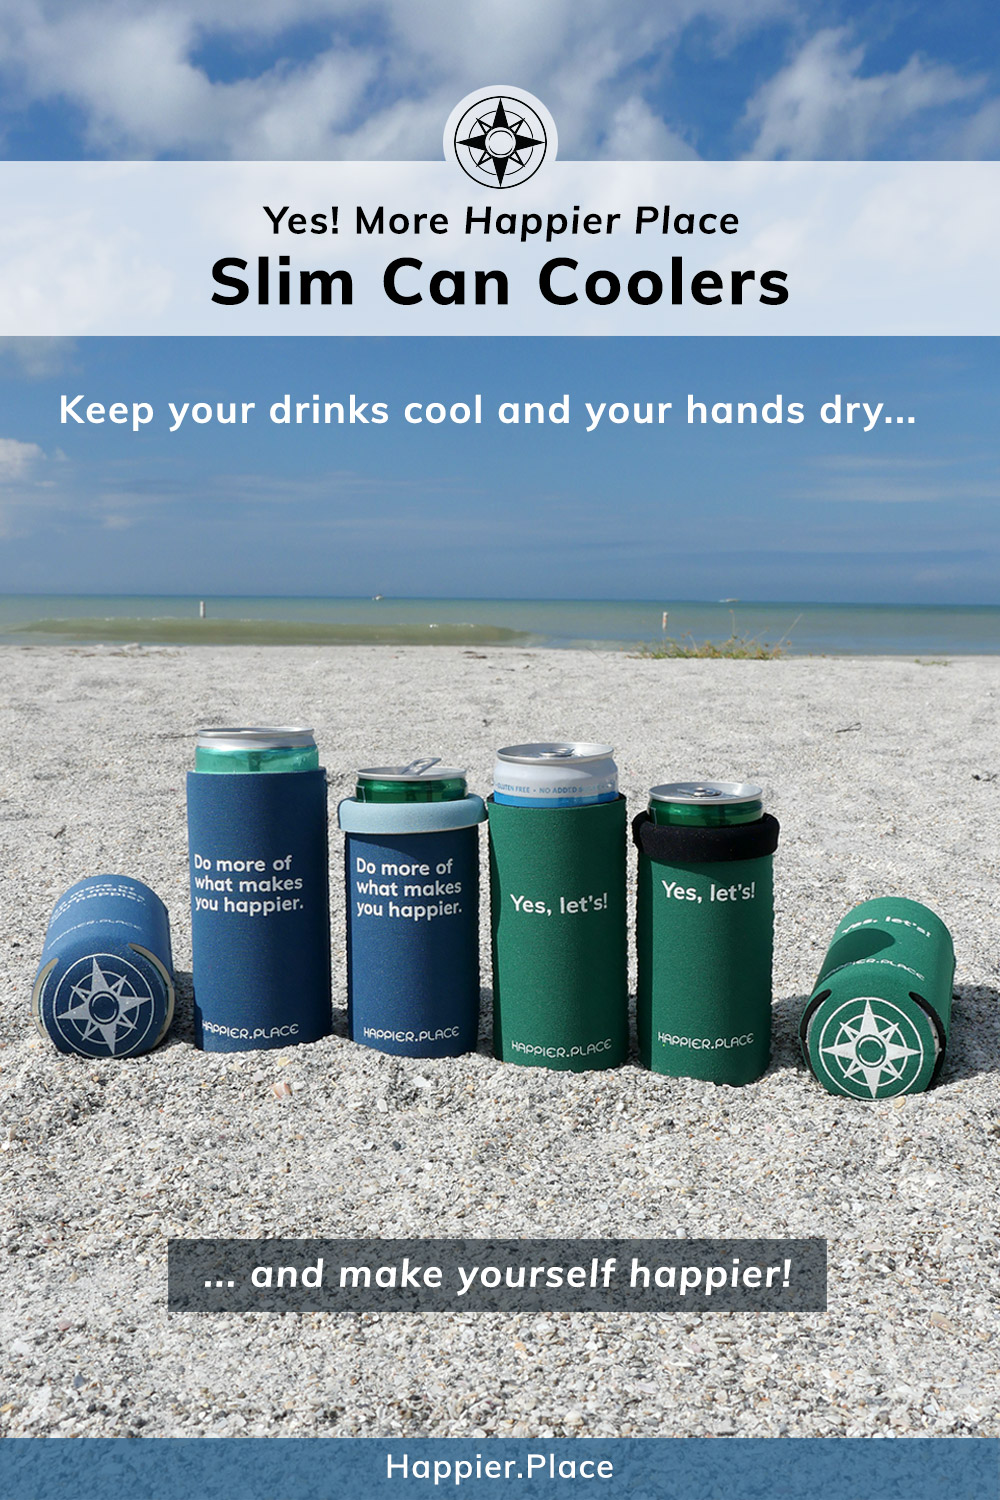 Yes more Happier Place Slim Can Coolers, cozies, beach, Yes let's and Do more of what makes you happier, keep your drinks cooler, your hands dry, makes yourself happier